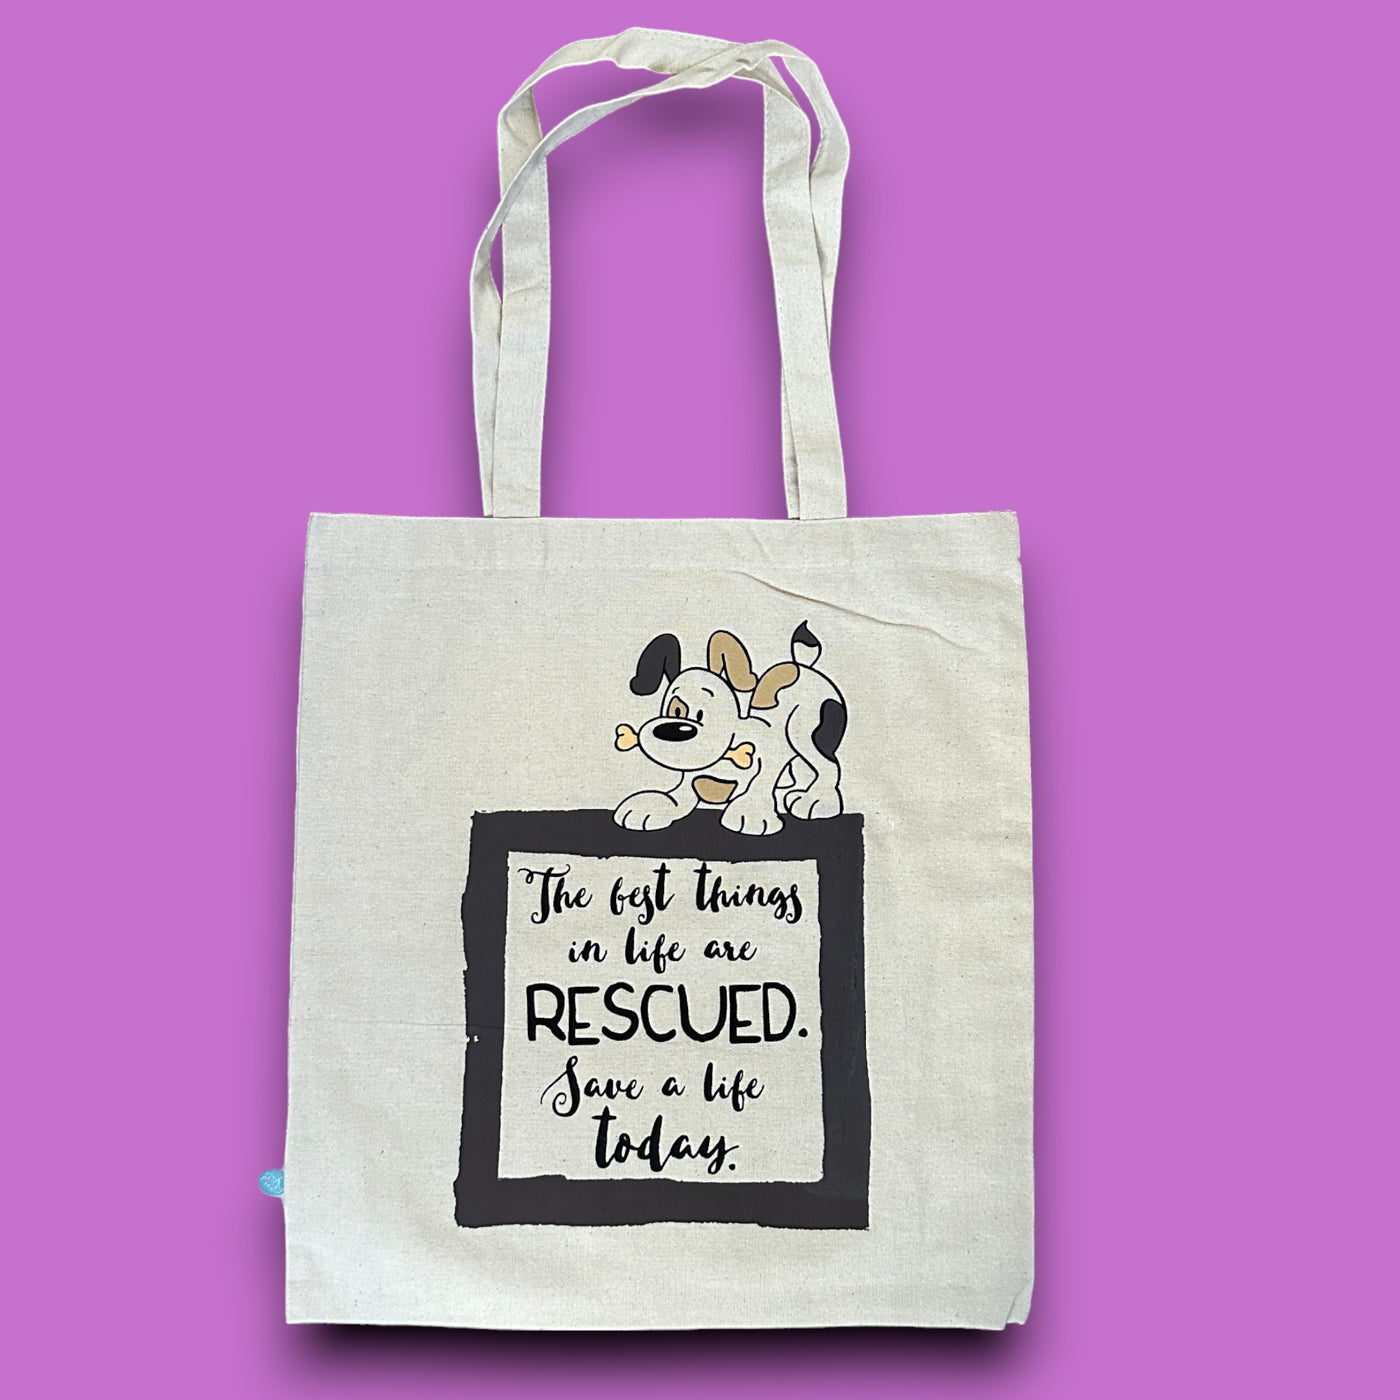 RESCUE RELIEF TOTE BAG - Save a Life | $5 donated to Brave Companion Dog Rescue